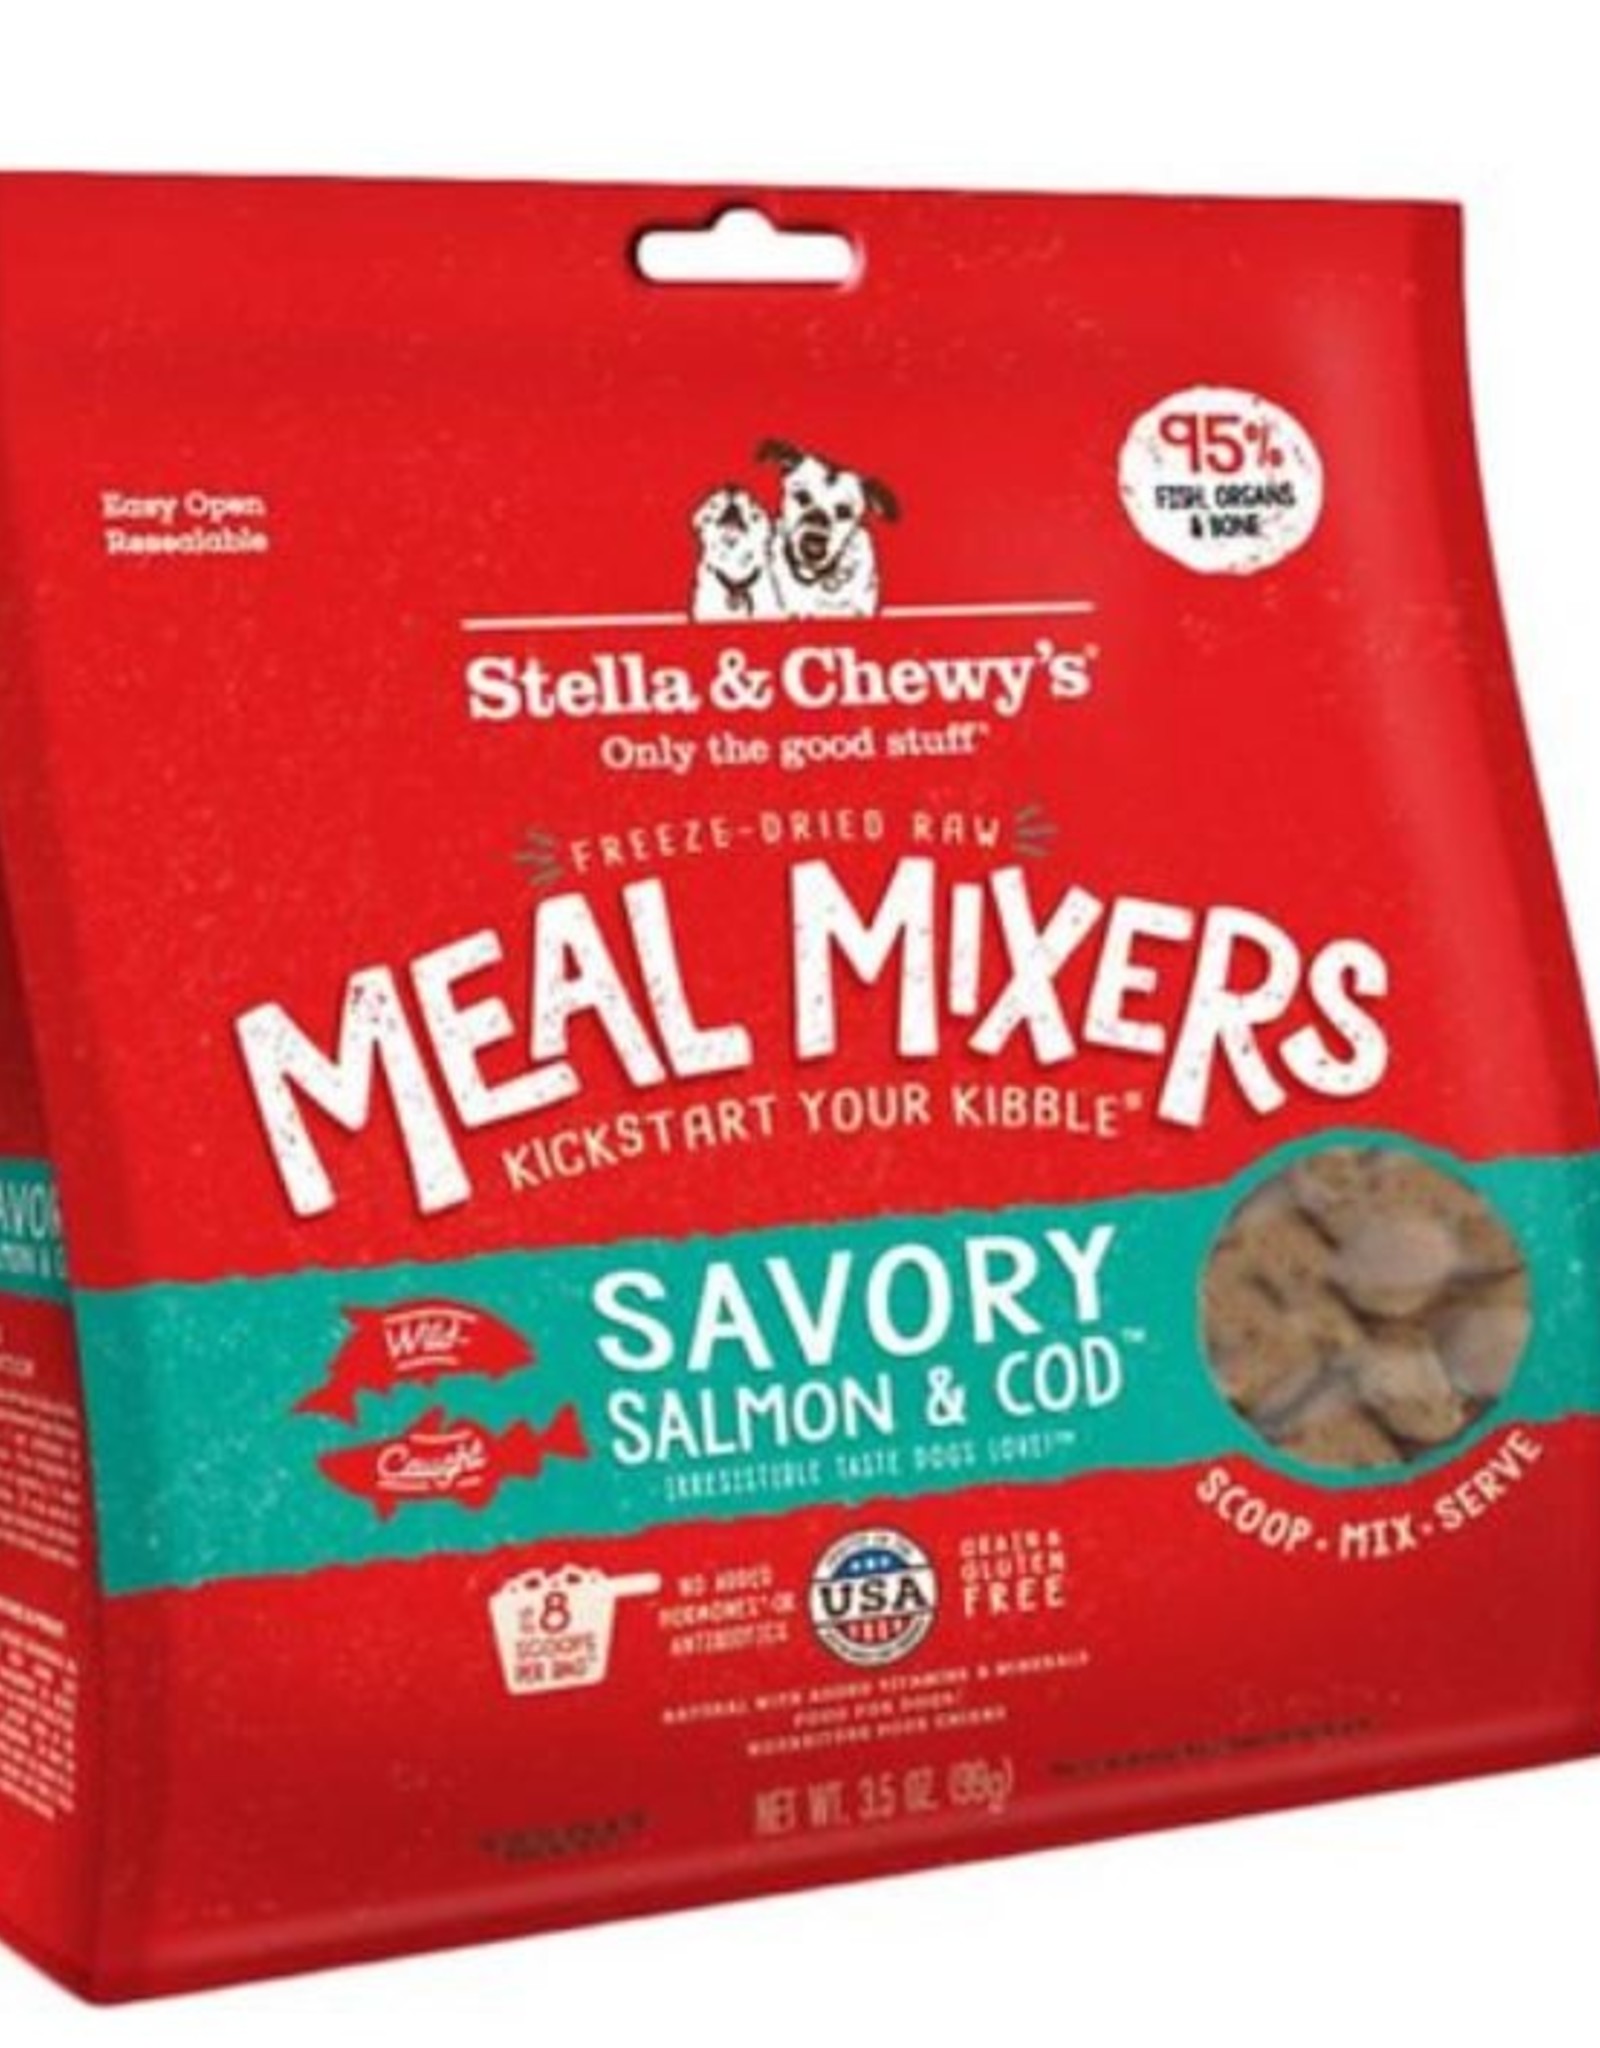 Stella & Chewy’s  Savory Salmon & Cod Meal Mixer